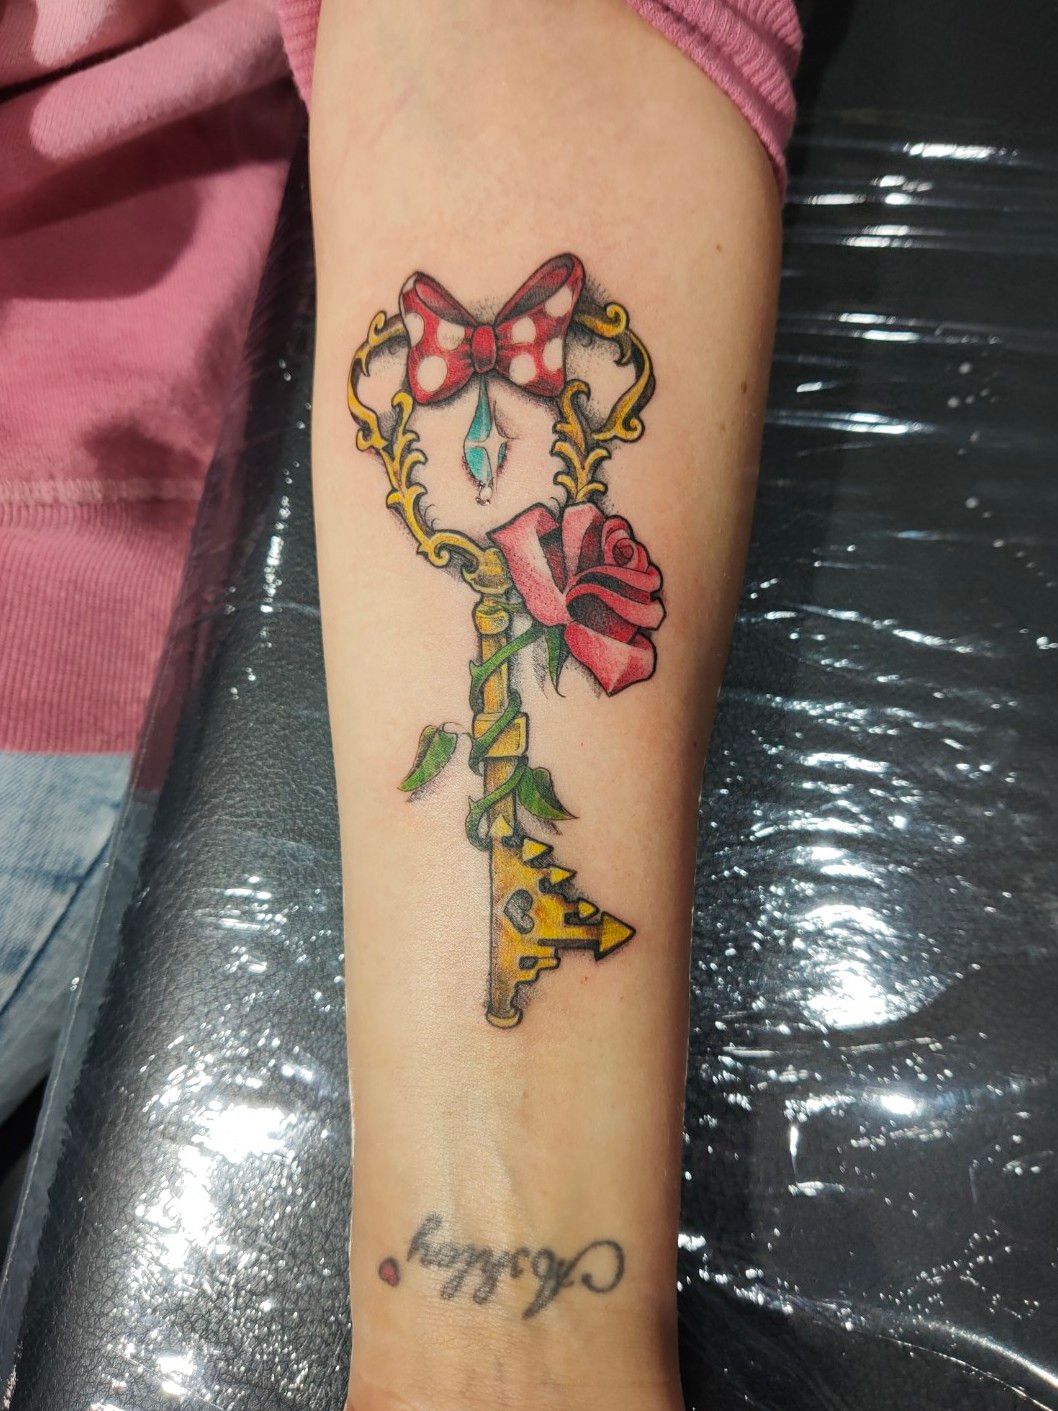 44 Disney Inspired Tattoos to Bring out Your Inner Princess 